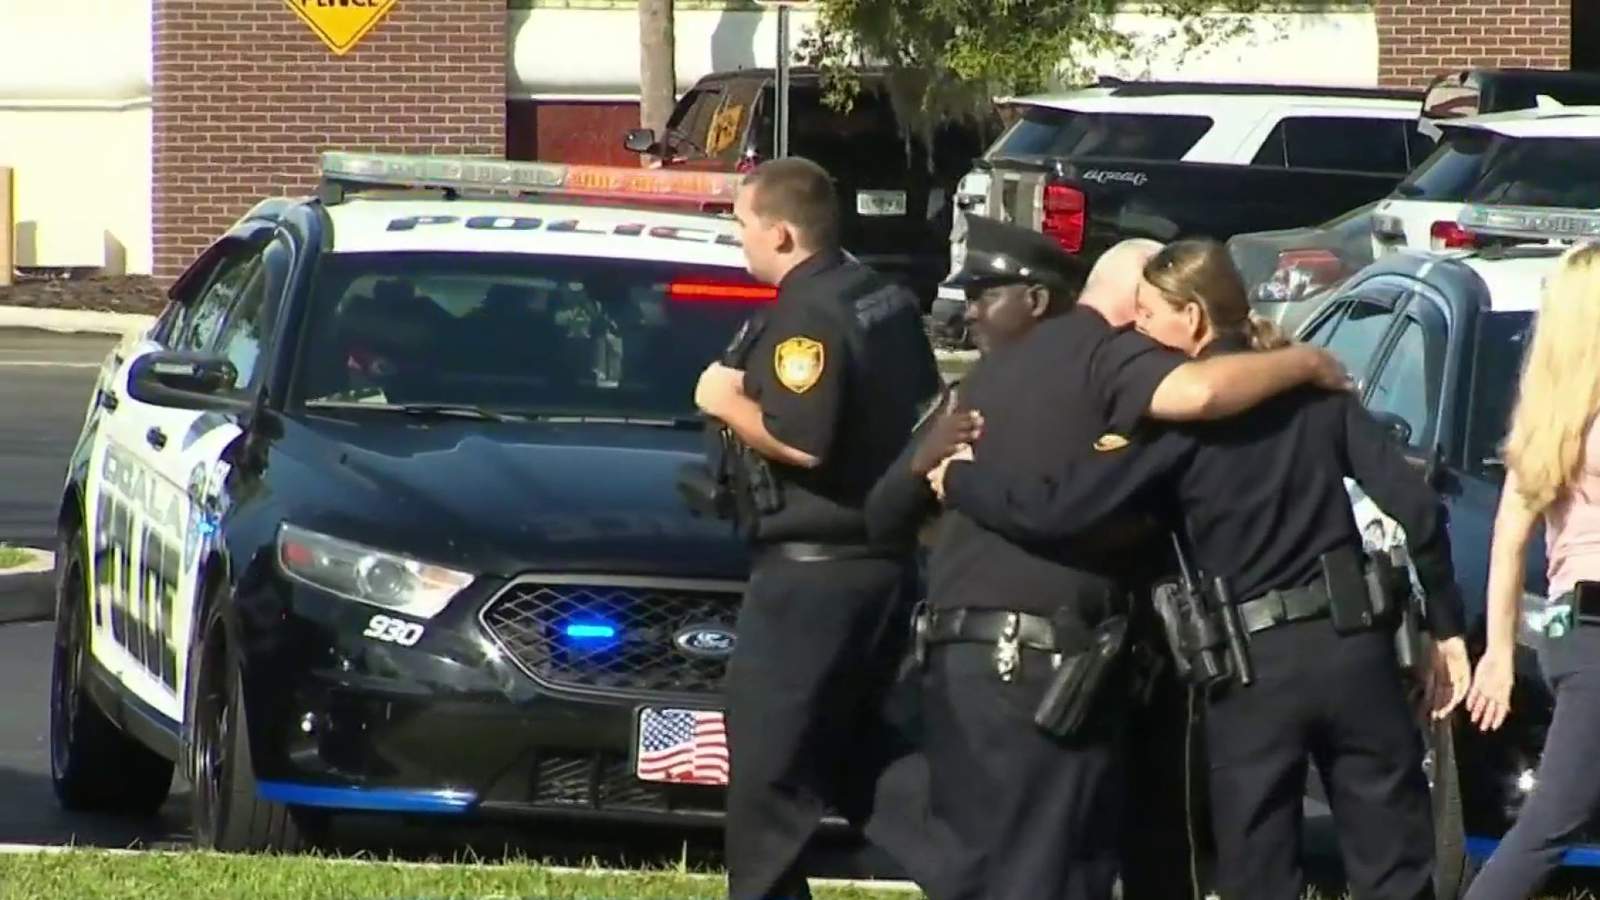 Community members, first responders salute Ocala Police chief during escort to funeral home